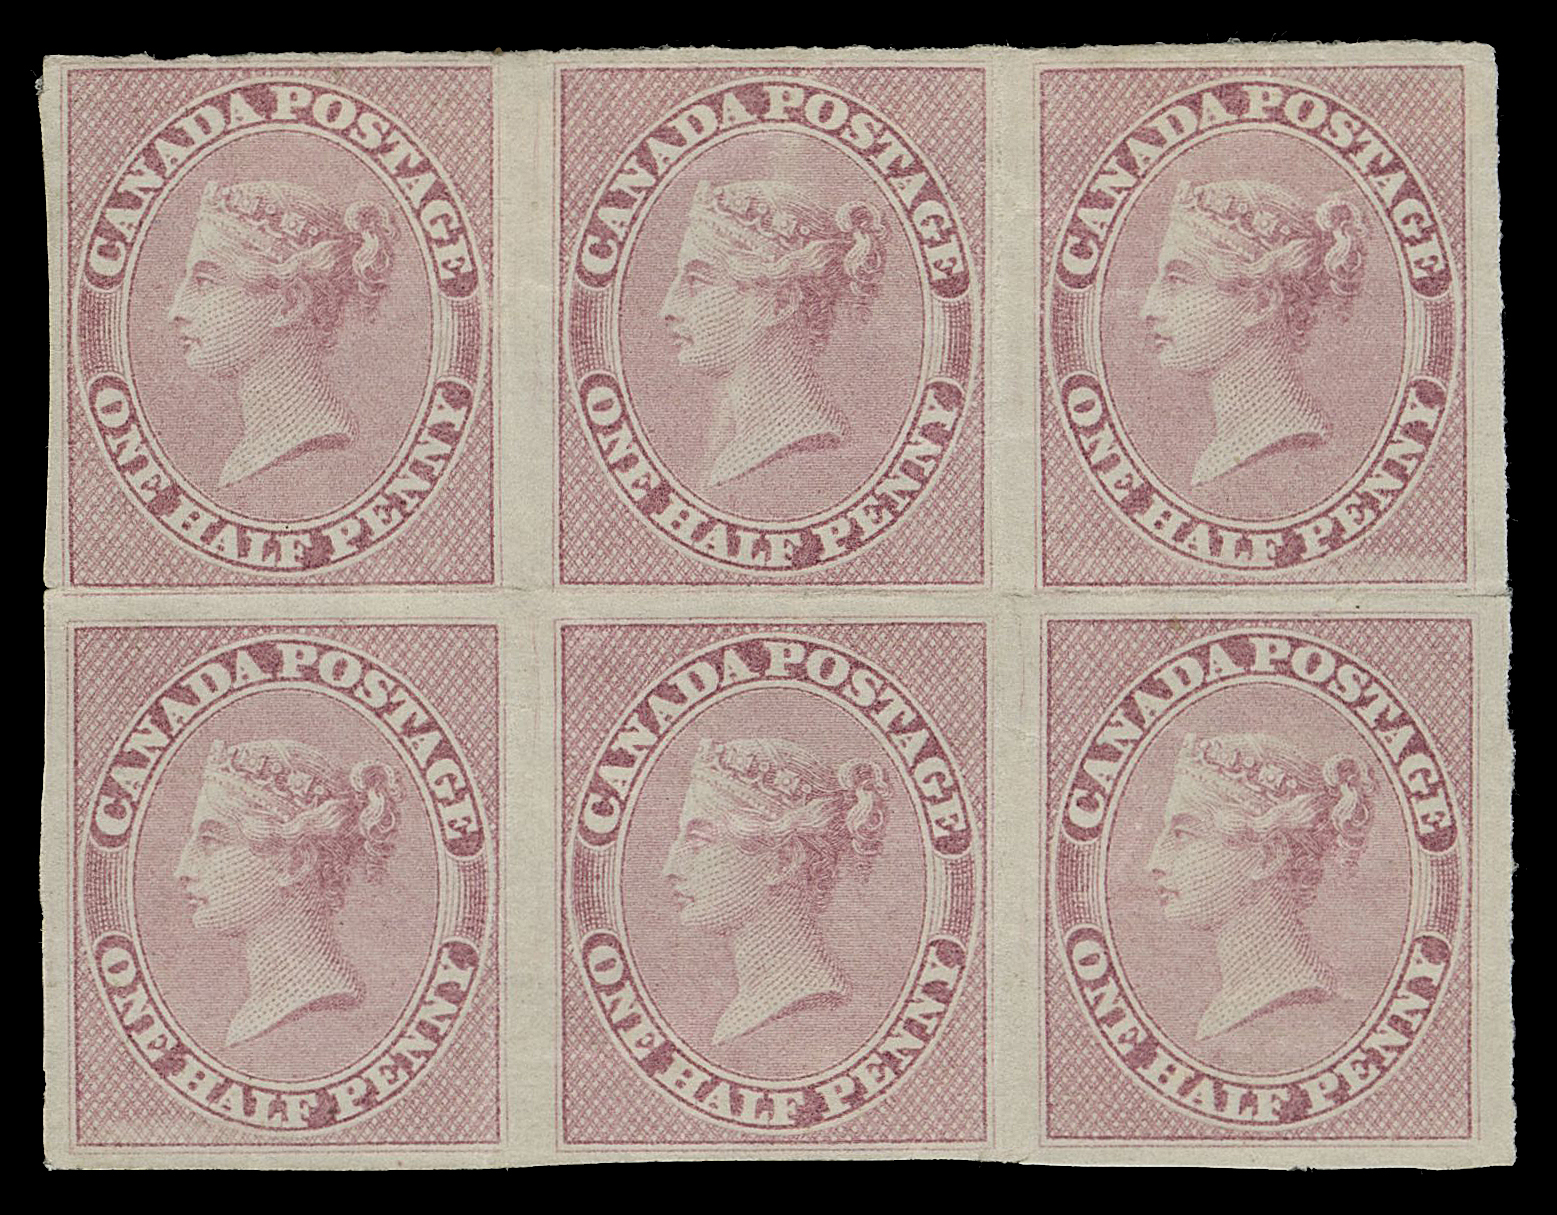 HALF PENNY AND ONE CENT  8,Mint block of six, Positions 86-88 / 98-100 from the plate of 120-subjects, folded vertically and horizontally mostly between stamps and other minor imperfections; nevertheless a rare mint multiple, F-VF appearance with large part original gum.

Short transfer varieties can be seen on Positions 88 and 98, both visible at the bottom of the design.

Provenance: Charles Lathrop Pack, Part II, Harmer, Rooke & Co., April 1945; Lot 125
The "Lindemann" Collection (private treaty, circa. 1997)